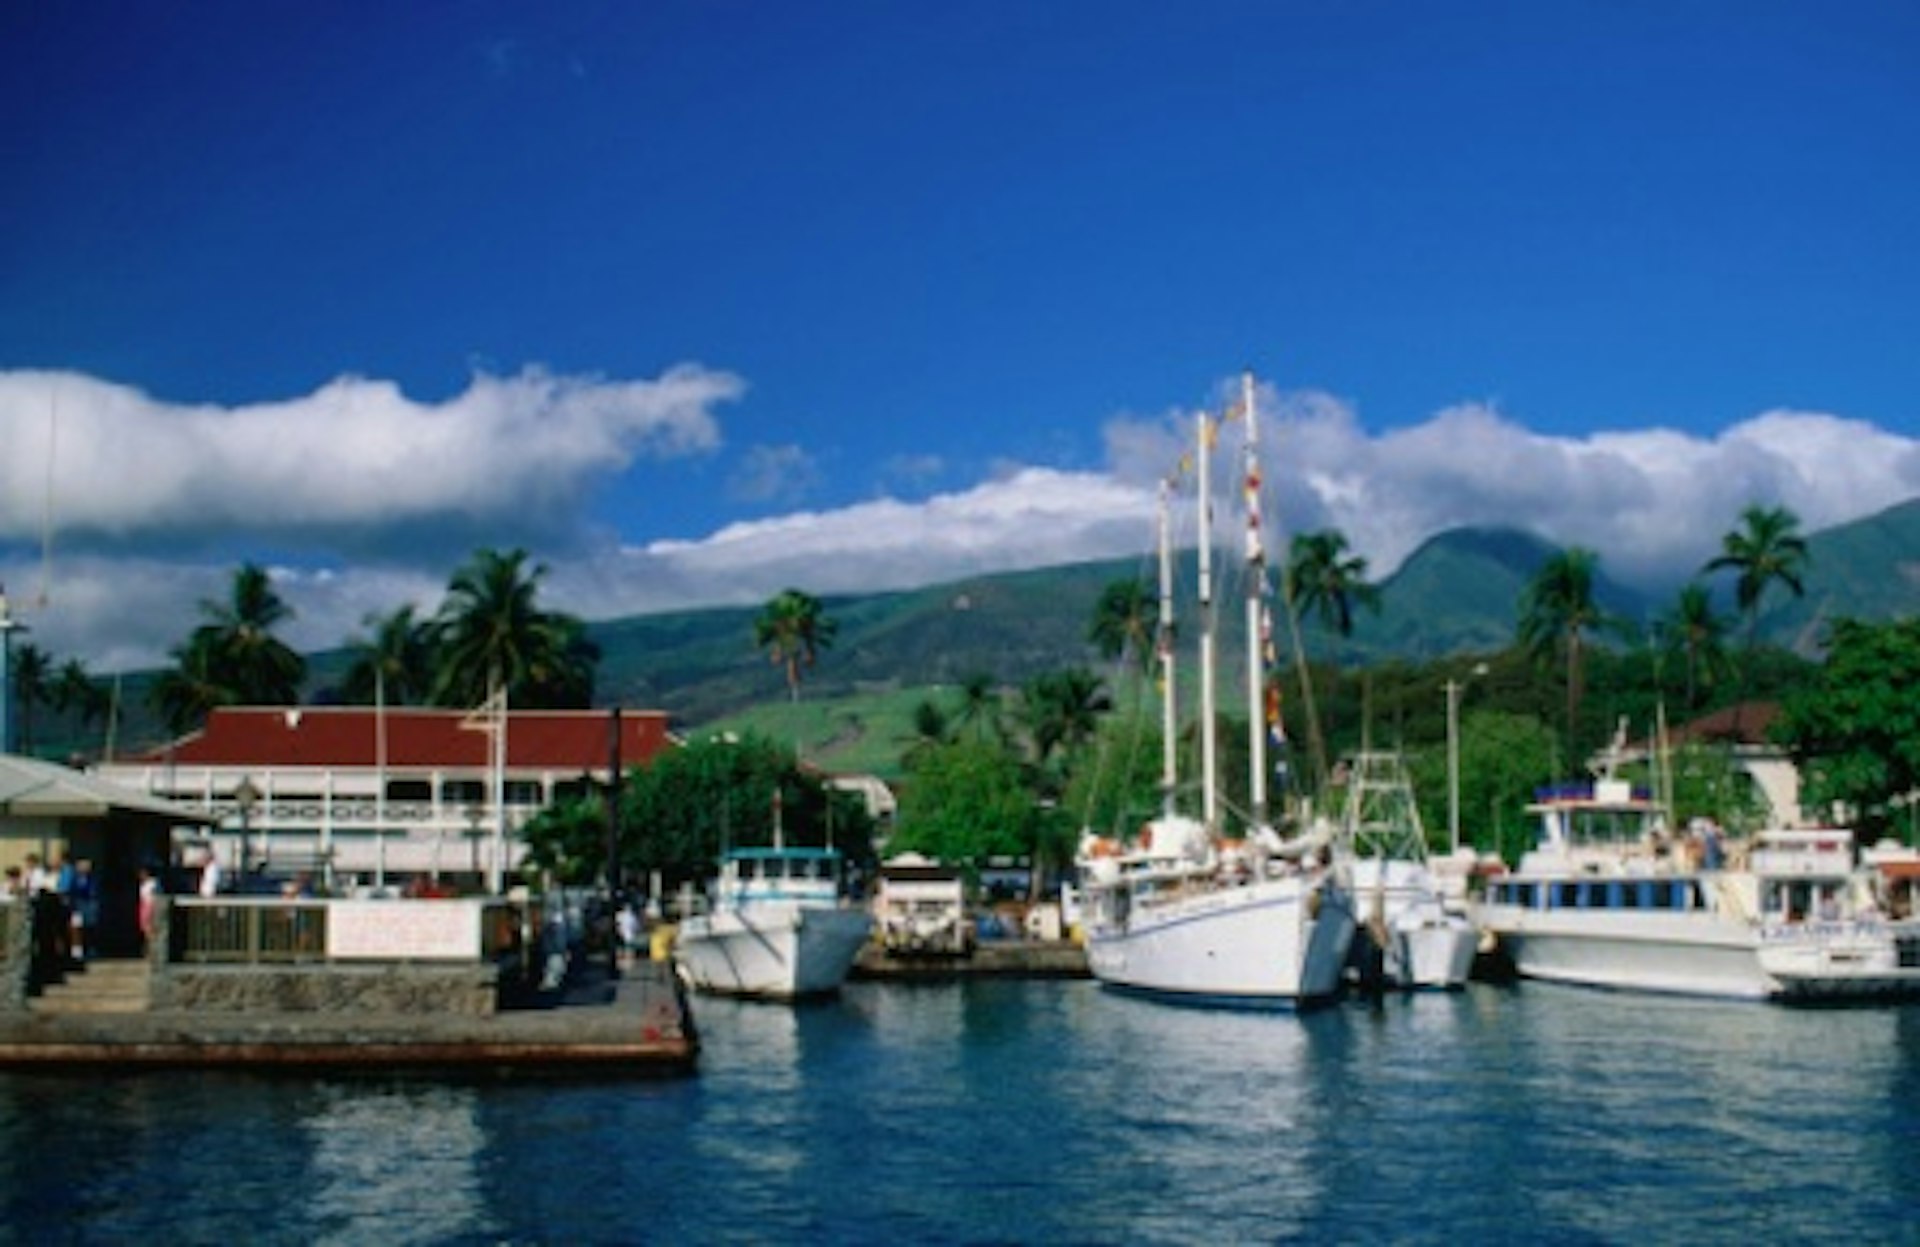 Boats moored in the Lahaina Harbor. Image by Ann Cecil/Getty Images.